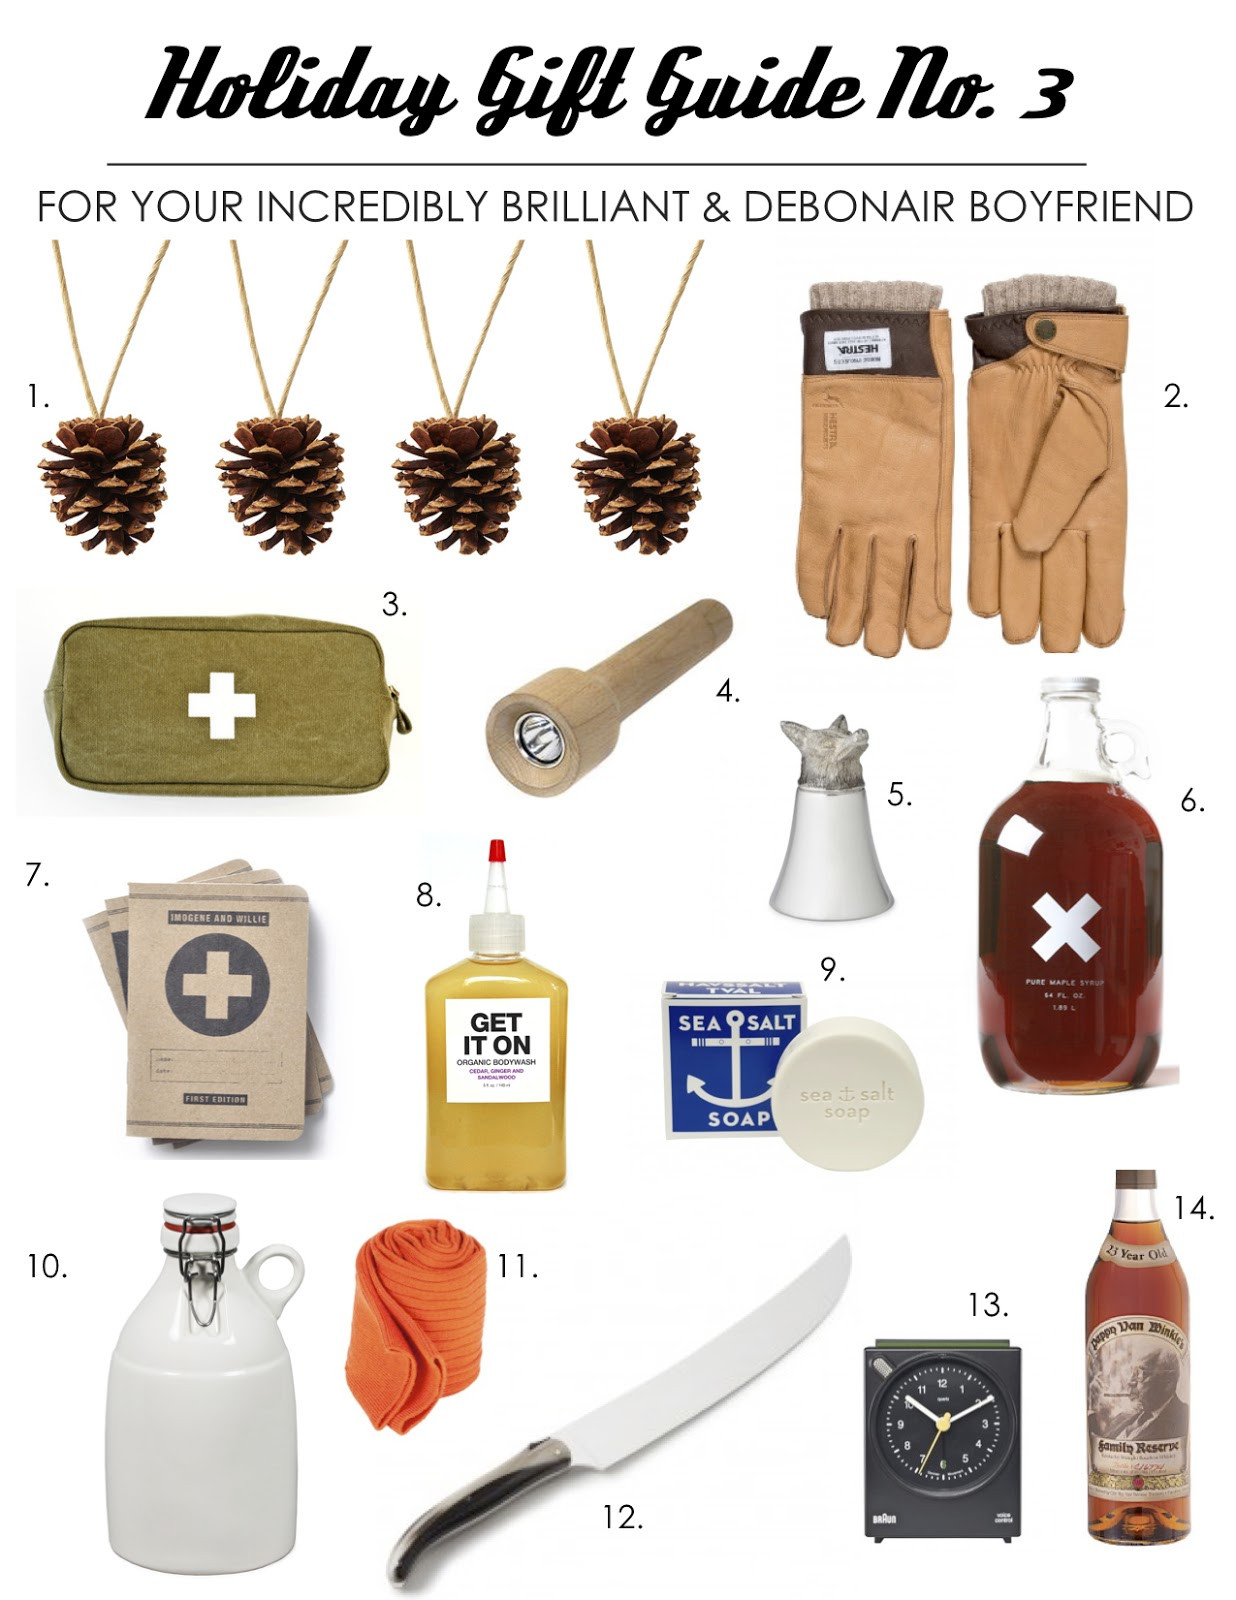 Ideas For Boyfriend Gift
 Gift Guide 2012 The Best Gifts for Your Boyfriend Hey